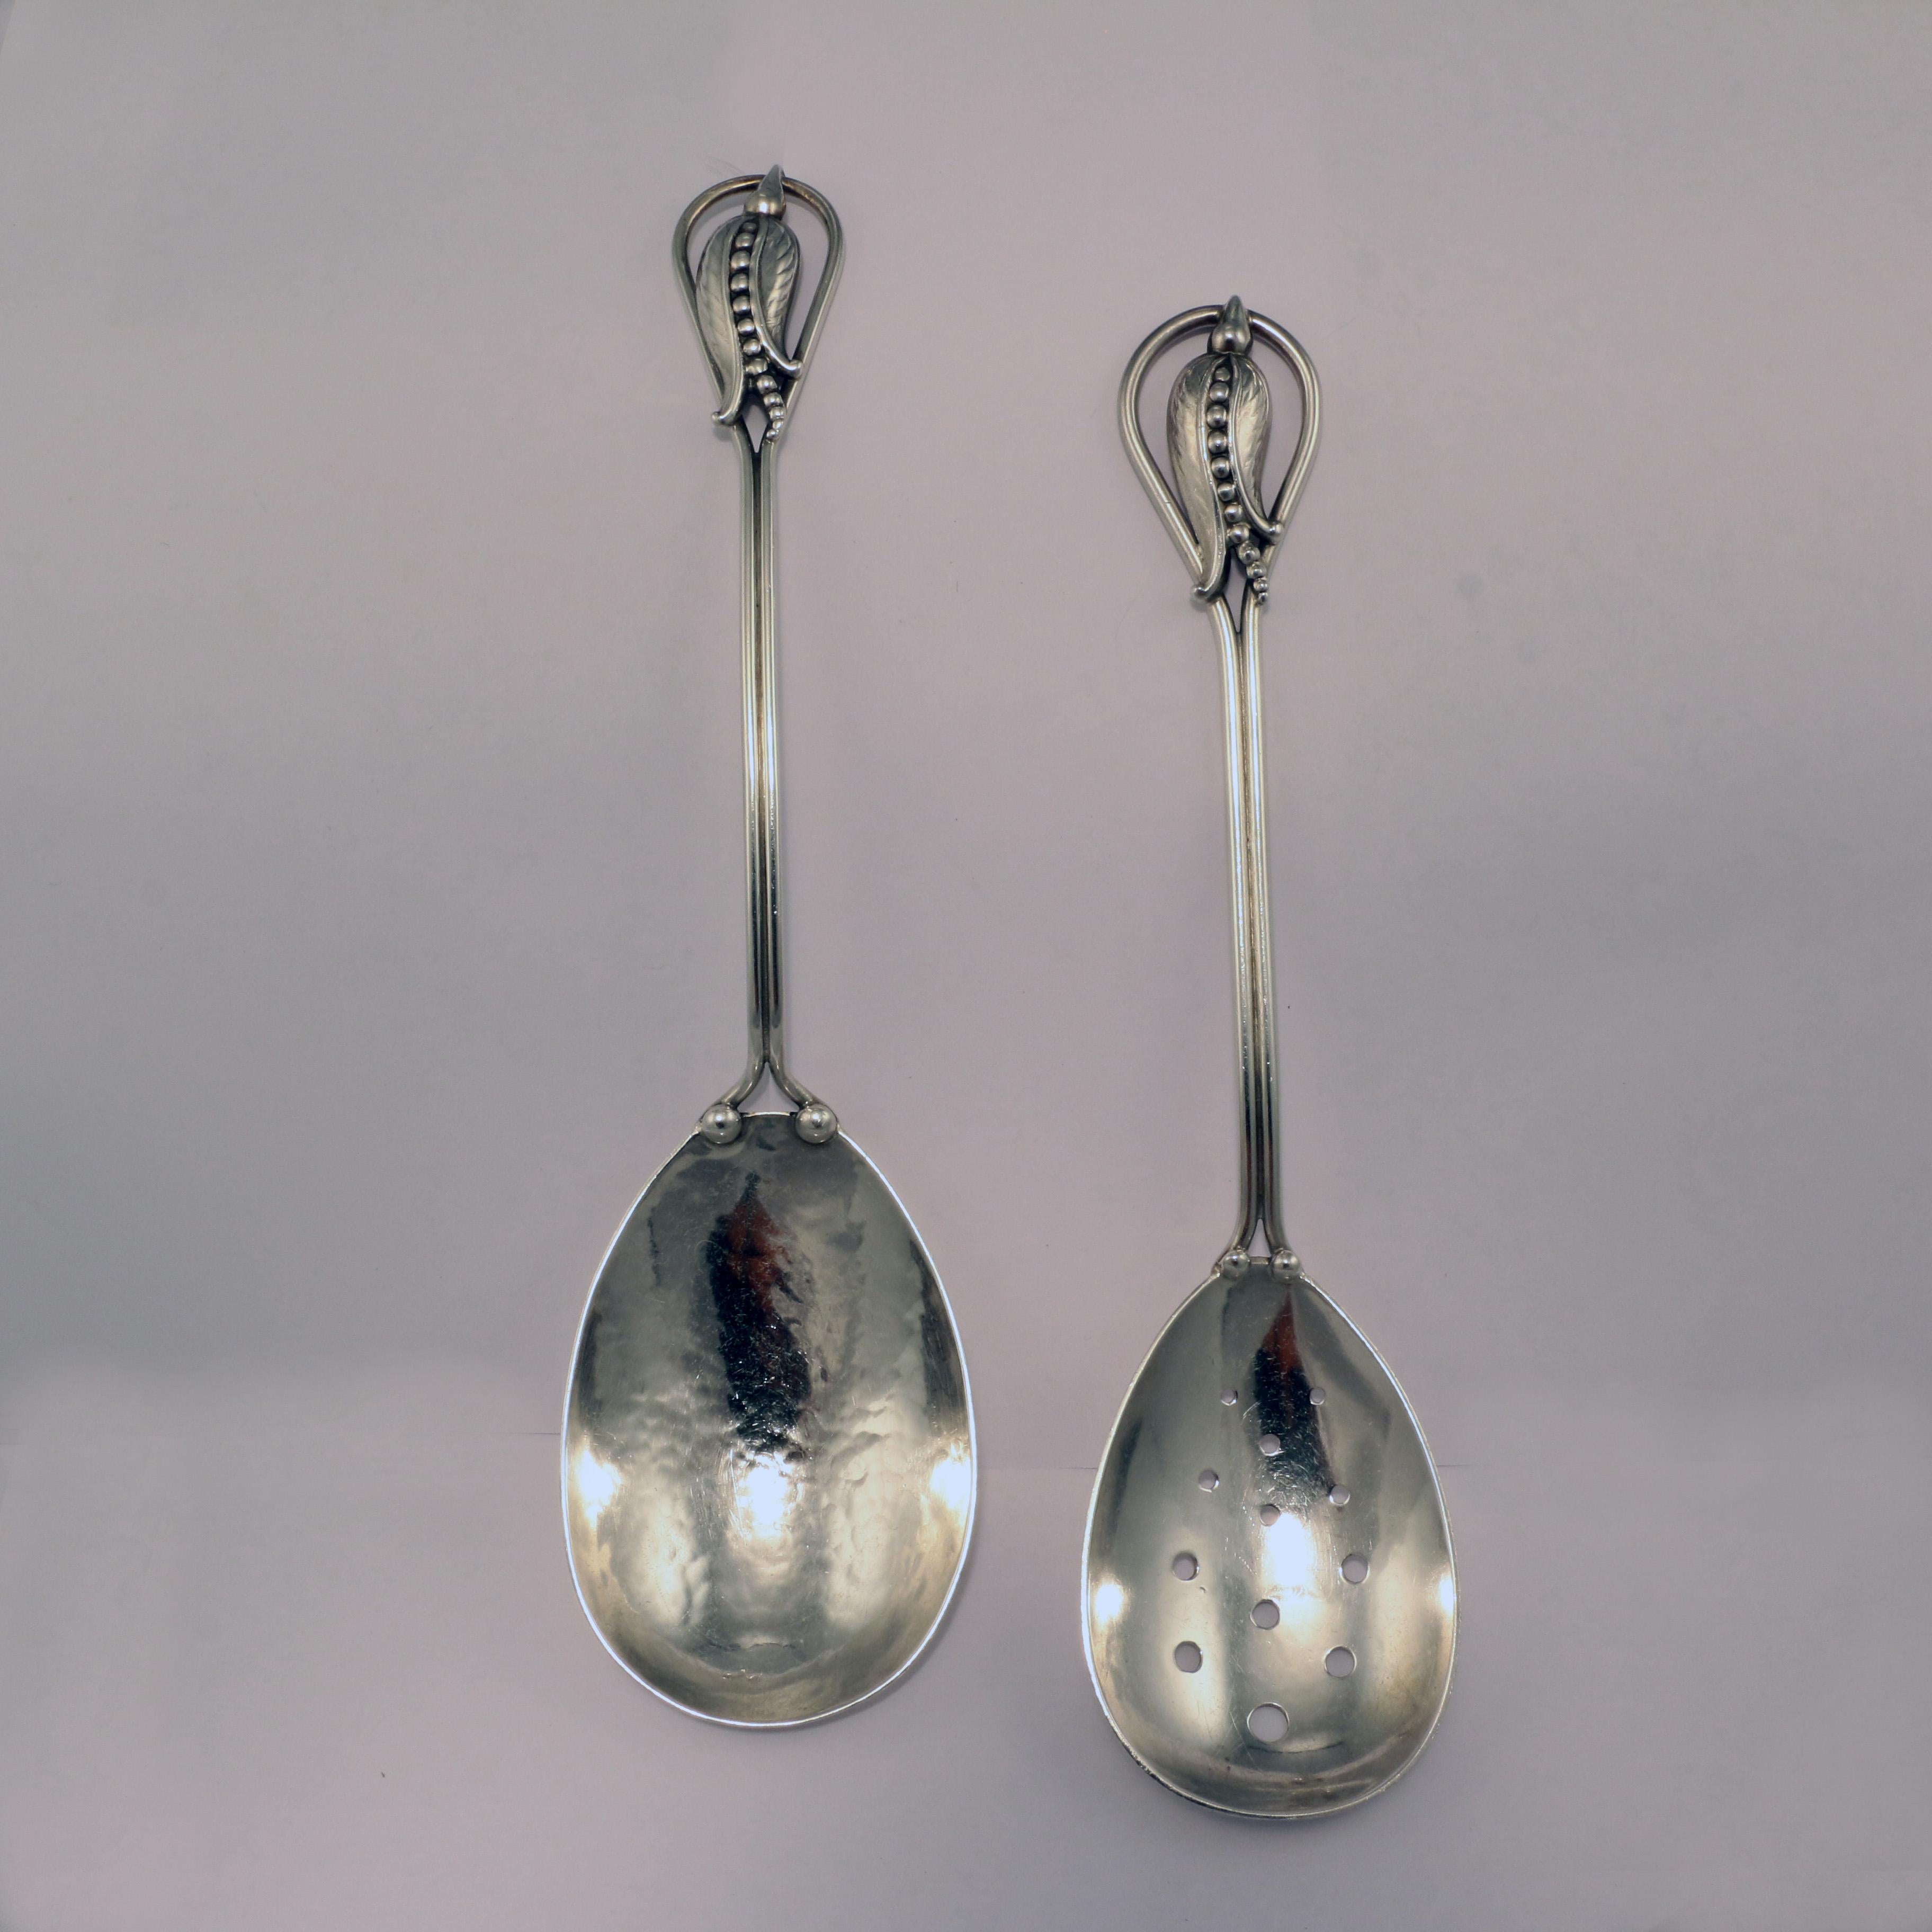 A set consisting of a salad serving spoon and pierced spoon in sterling silver by Karl Poul Petersen in his renowned blossom corn flower pattern.